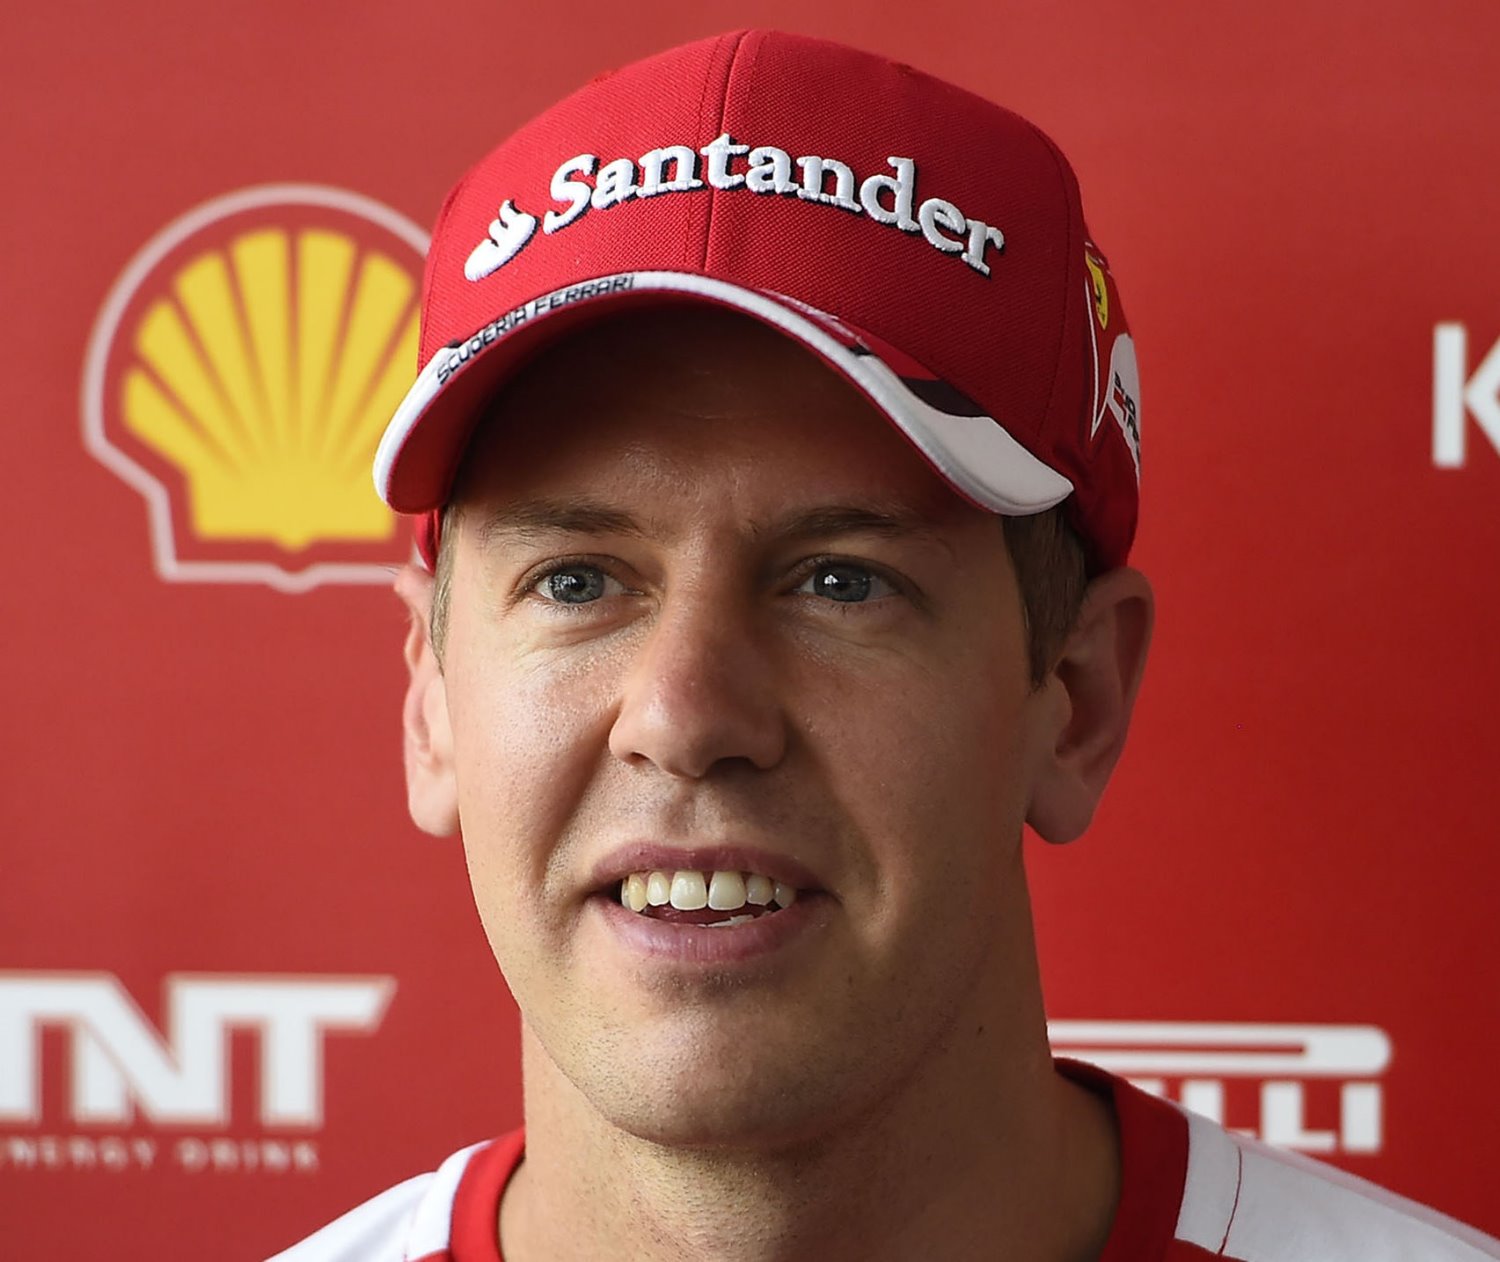 Vettel hopes to stop the Mercedes borefest at the front of F1